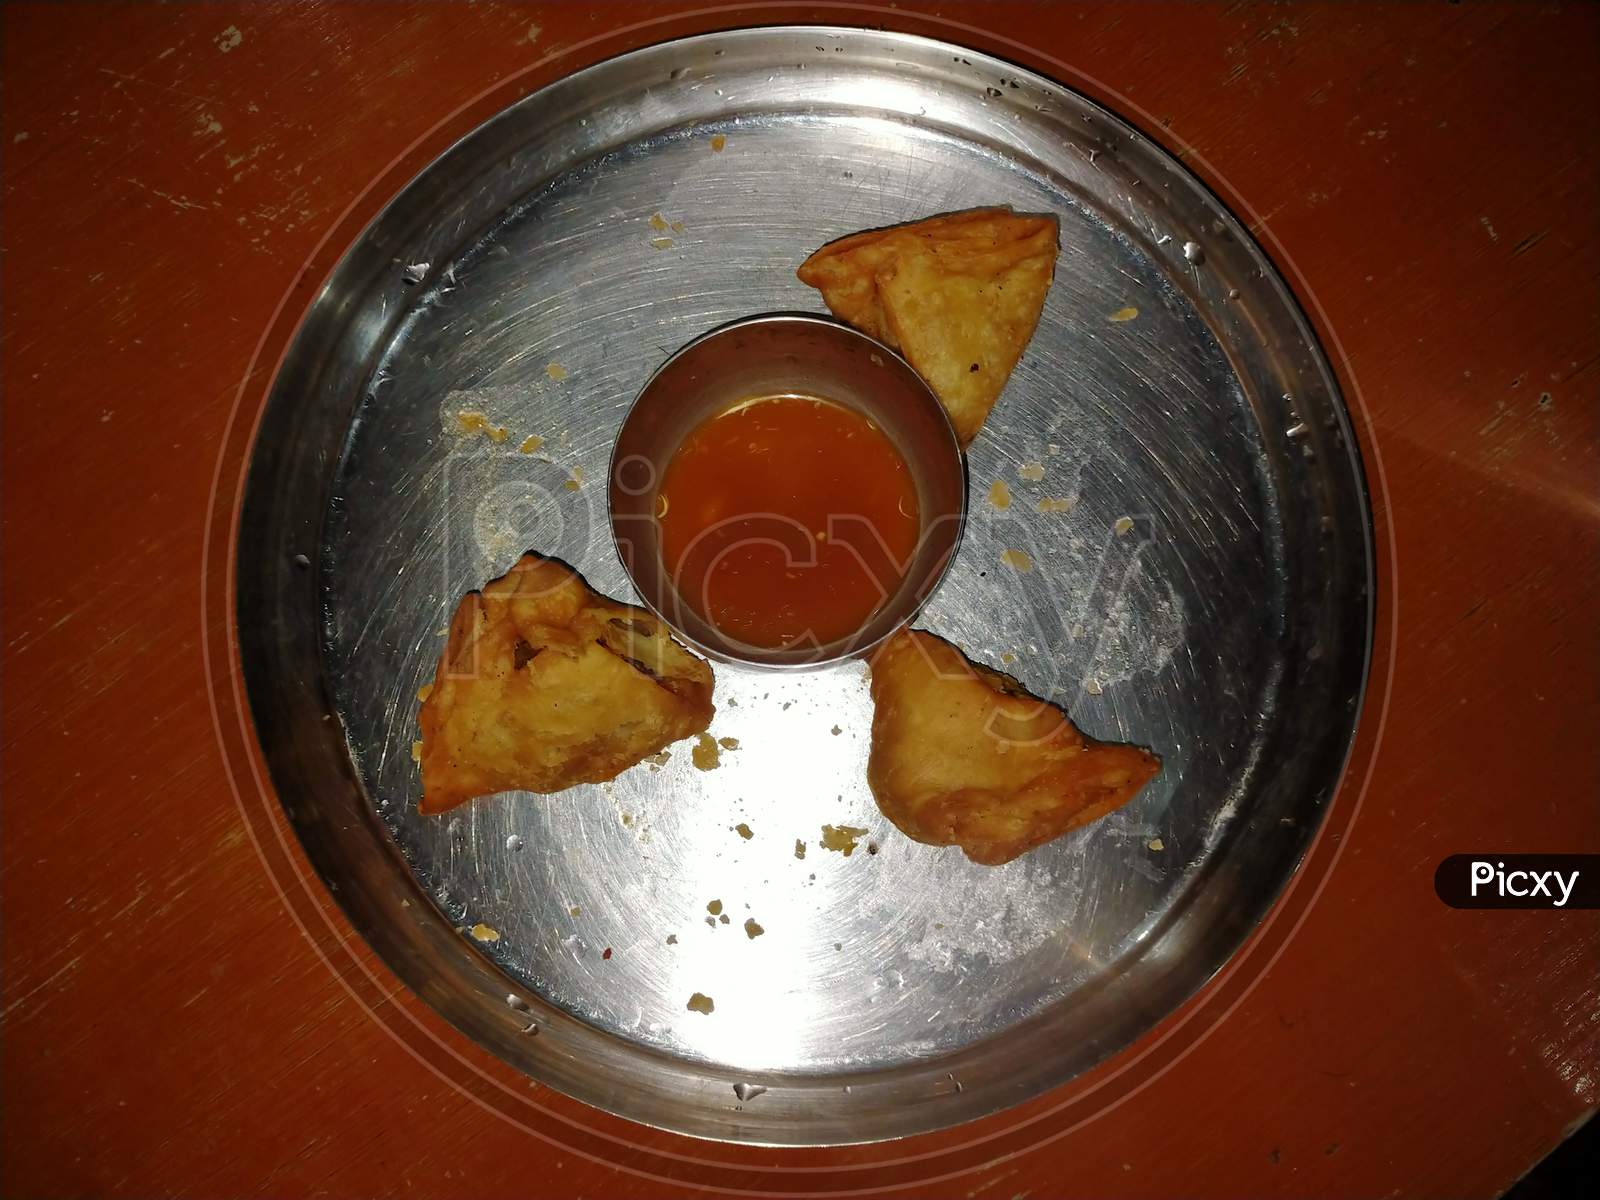 Samosa and chutney in a plate with black and grey background